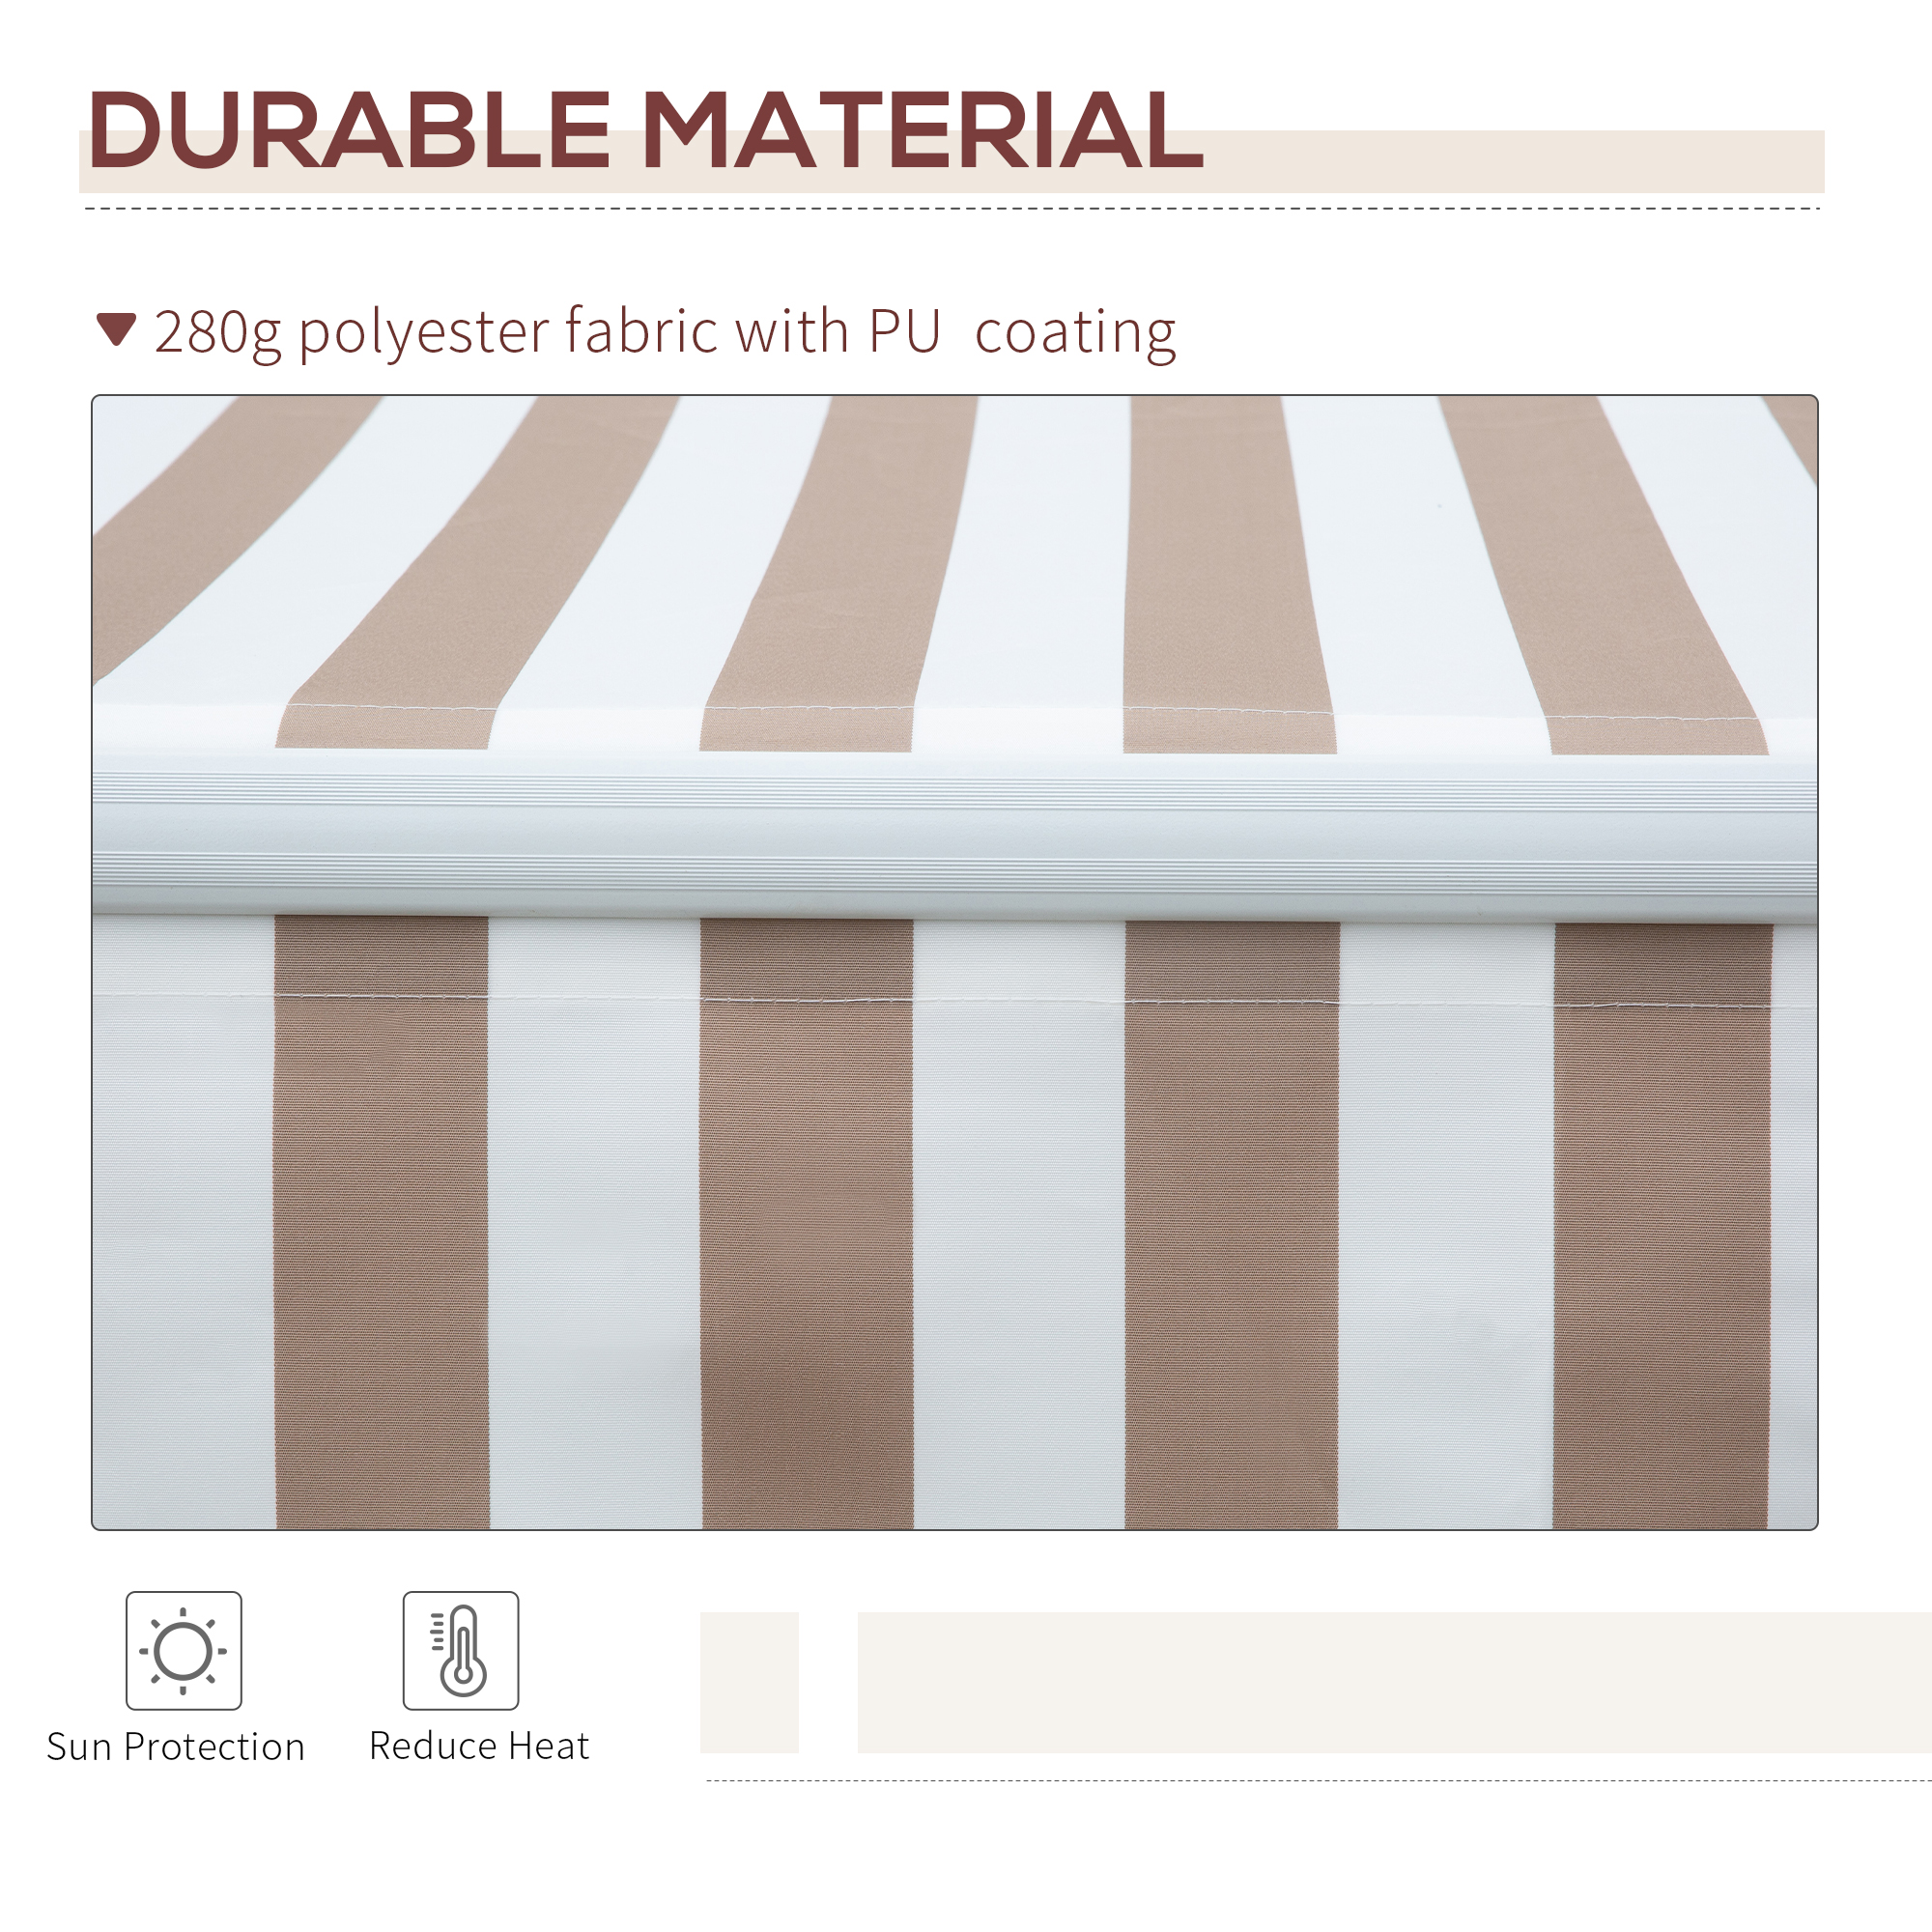 Outsunny 12' x 8' Retractable Awning Patio Awnings Sun Shade Shelter with Manual Crank Handle, 280g/mÂ² UV & Water-Resistant Fabric and Aluminum Frame for Deck, Balcony, Yard, Beige - image 3 of 9